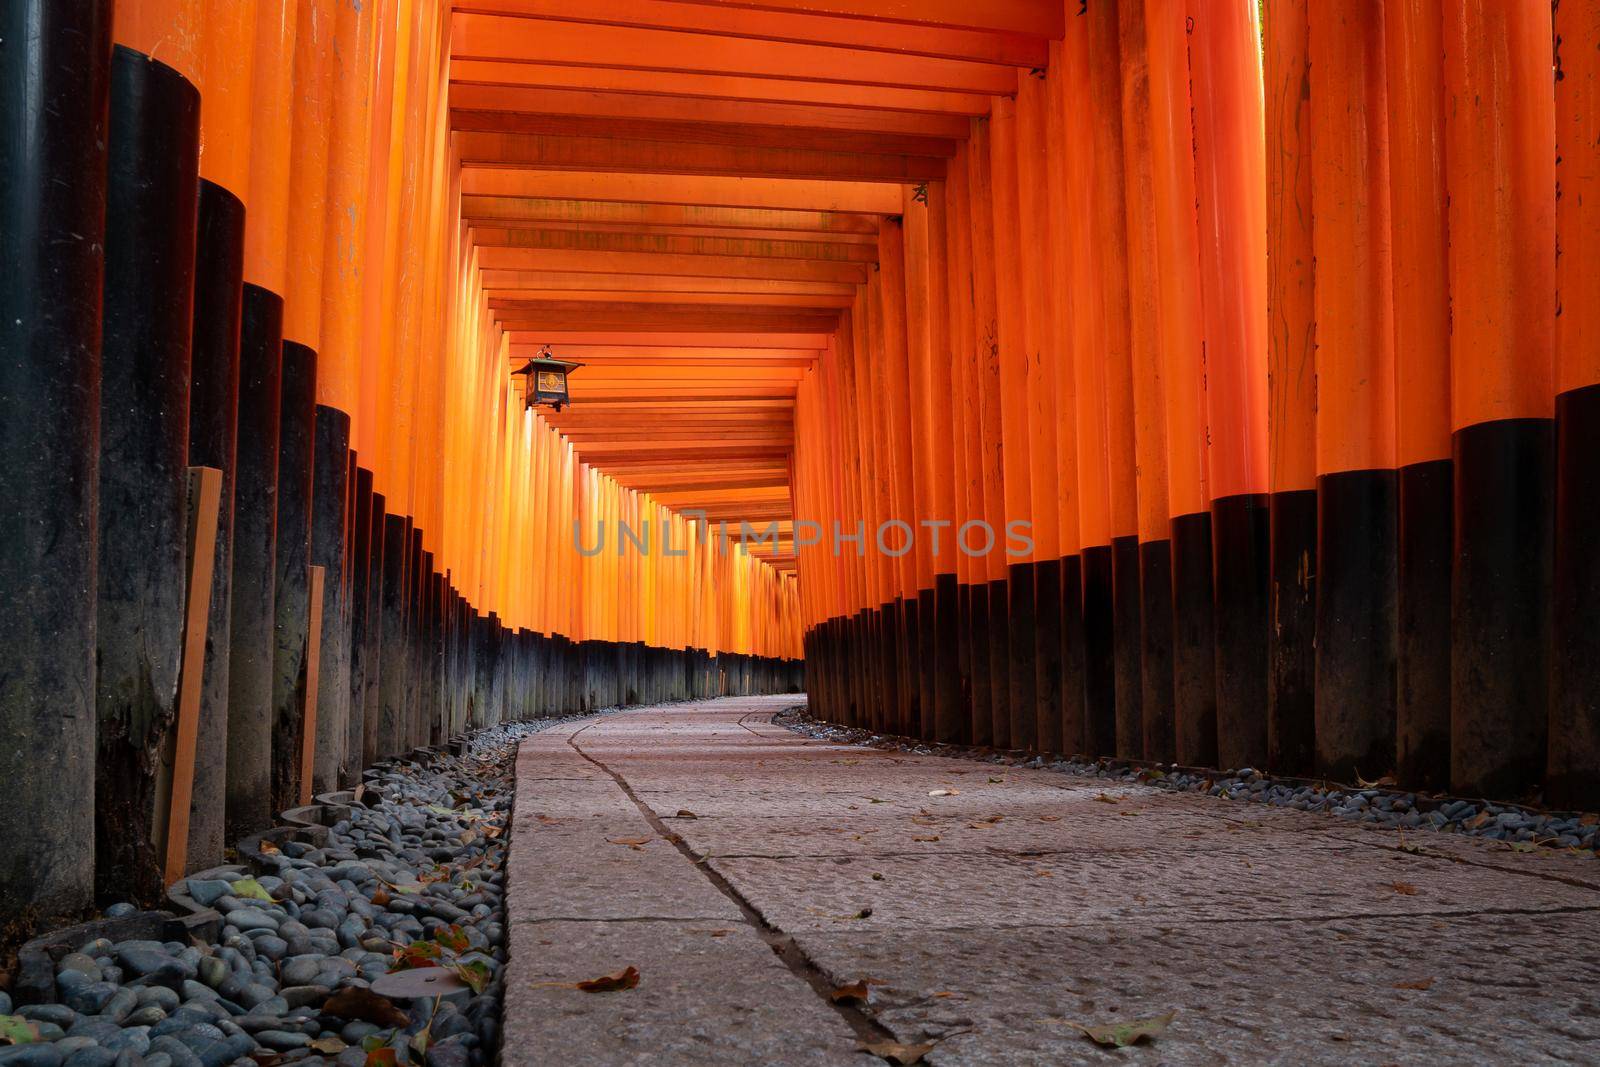 The red torii gates walkway path at fushimi inari taisha shrine the one of attraction  landmarks for tourist in Kyoto, Japan.